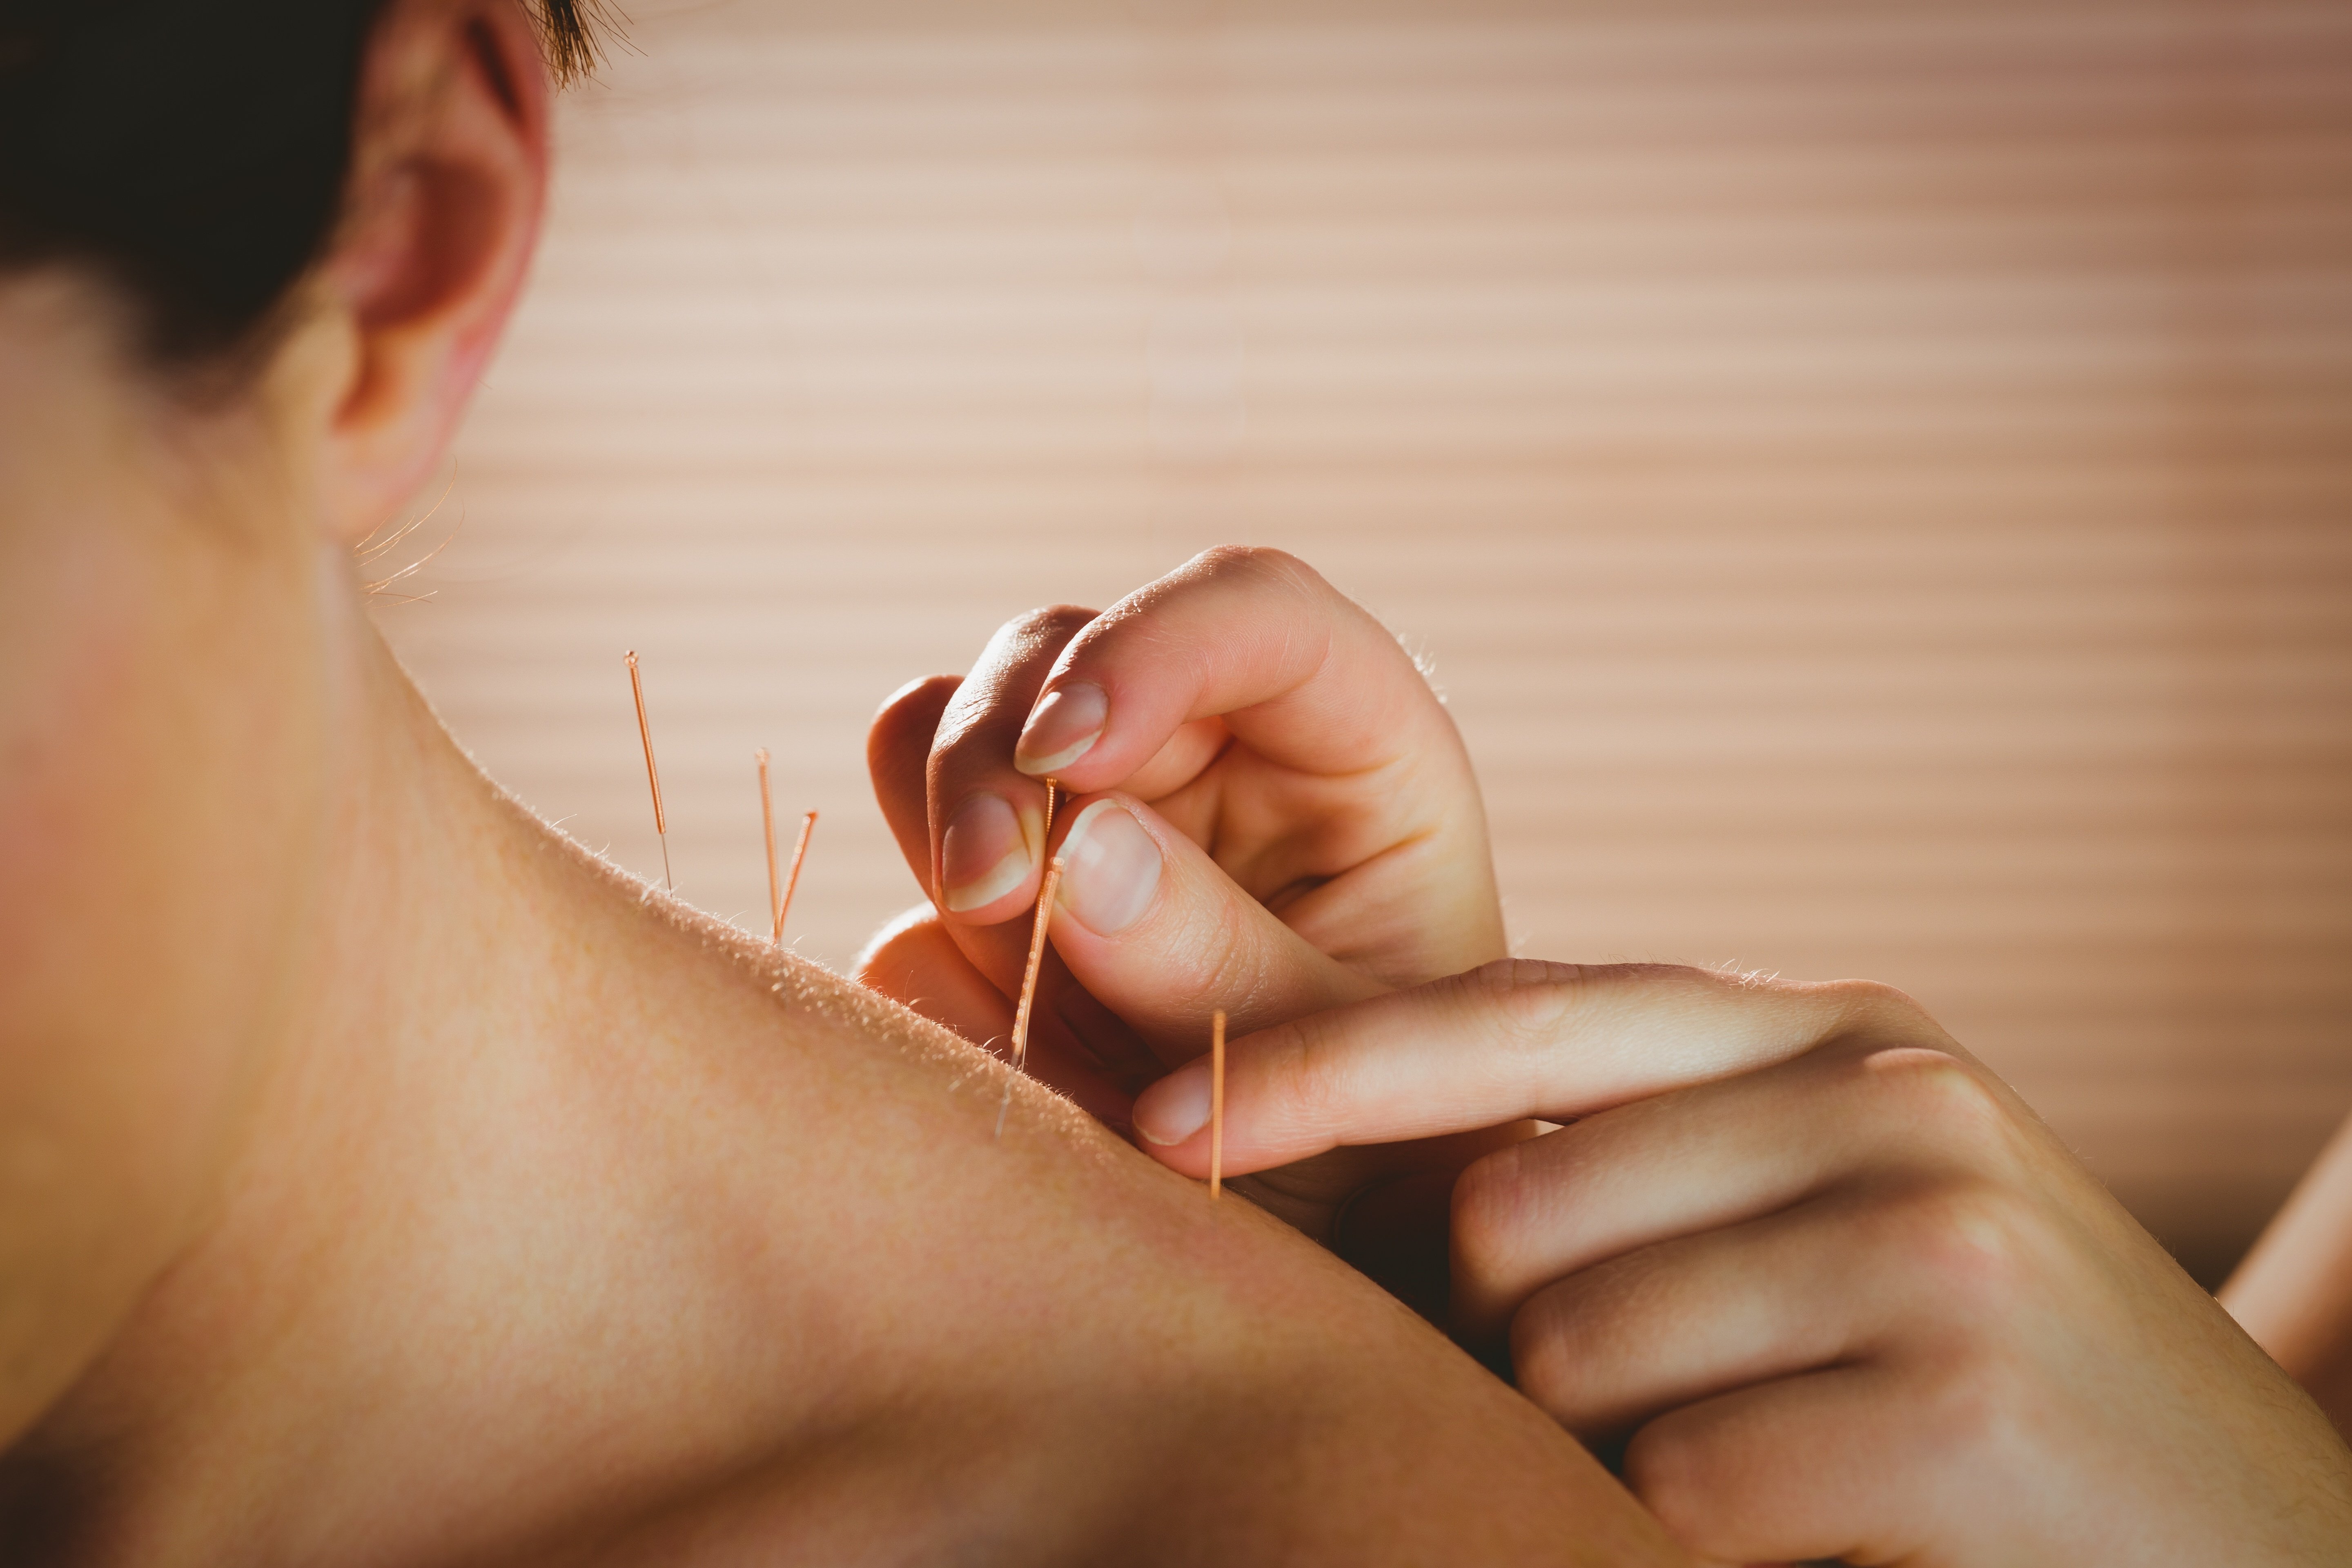 Baton Rouge Area Acupuncture Services: The Benefits of Acupuncture Treatment